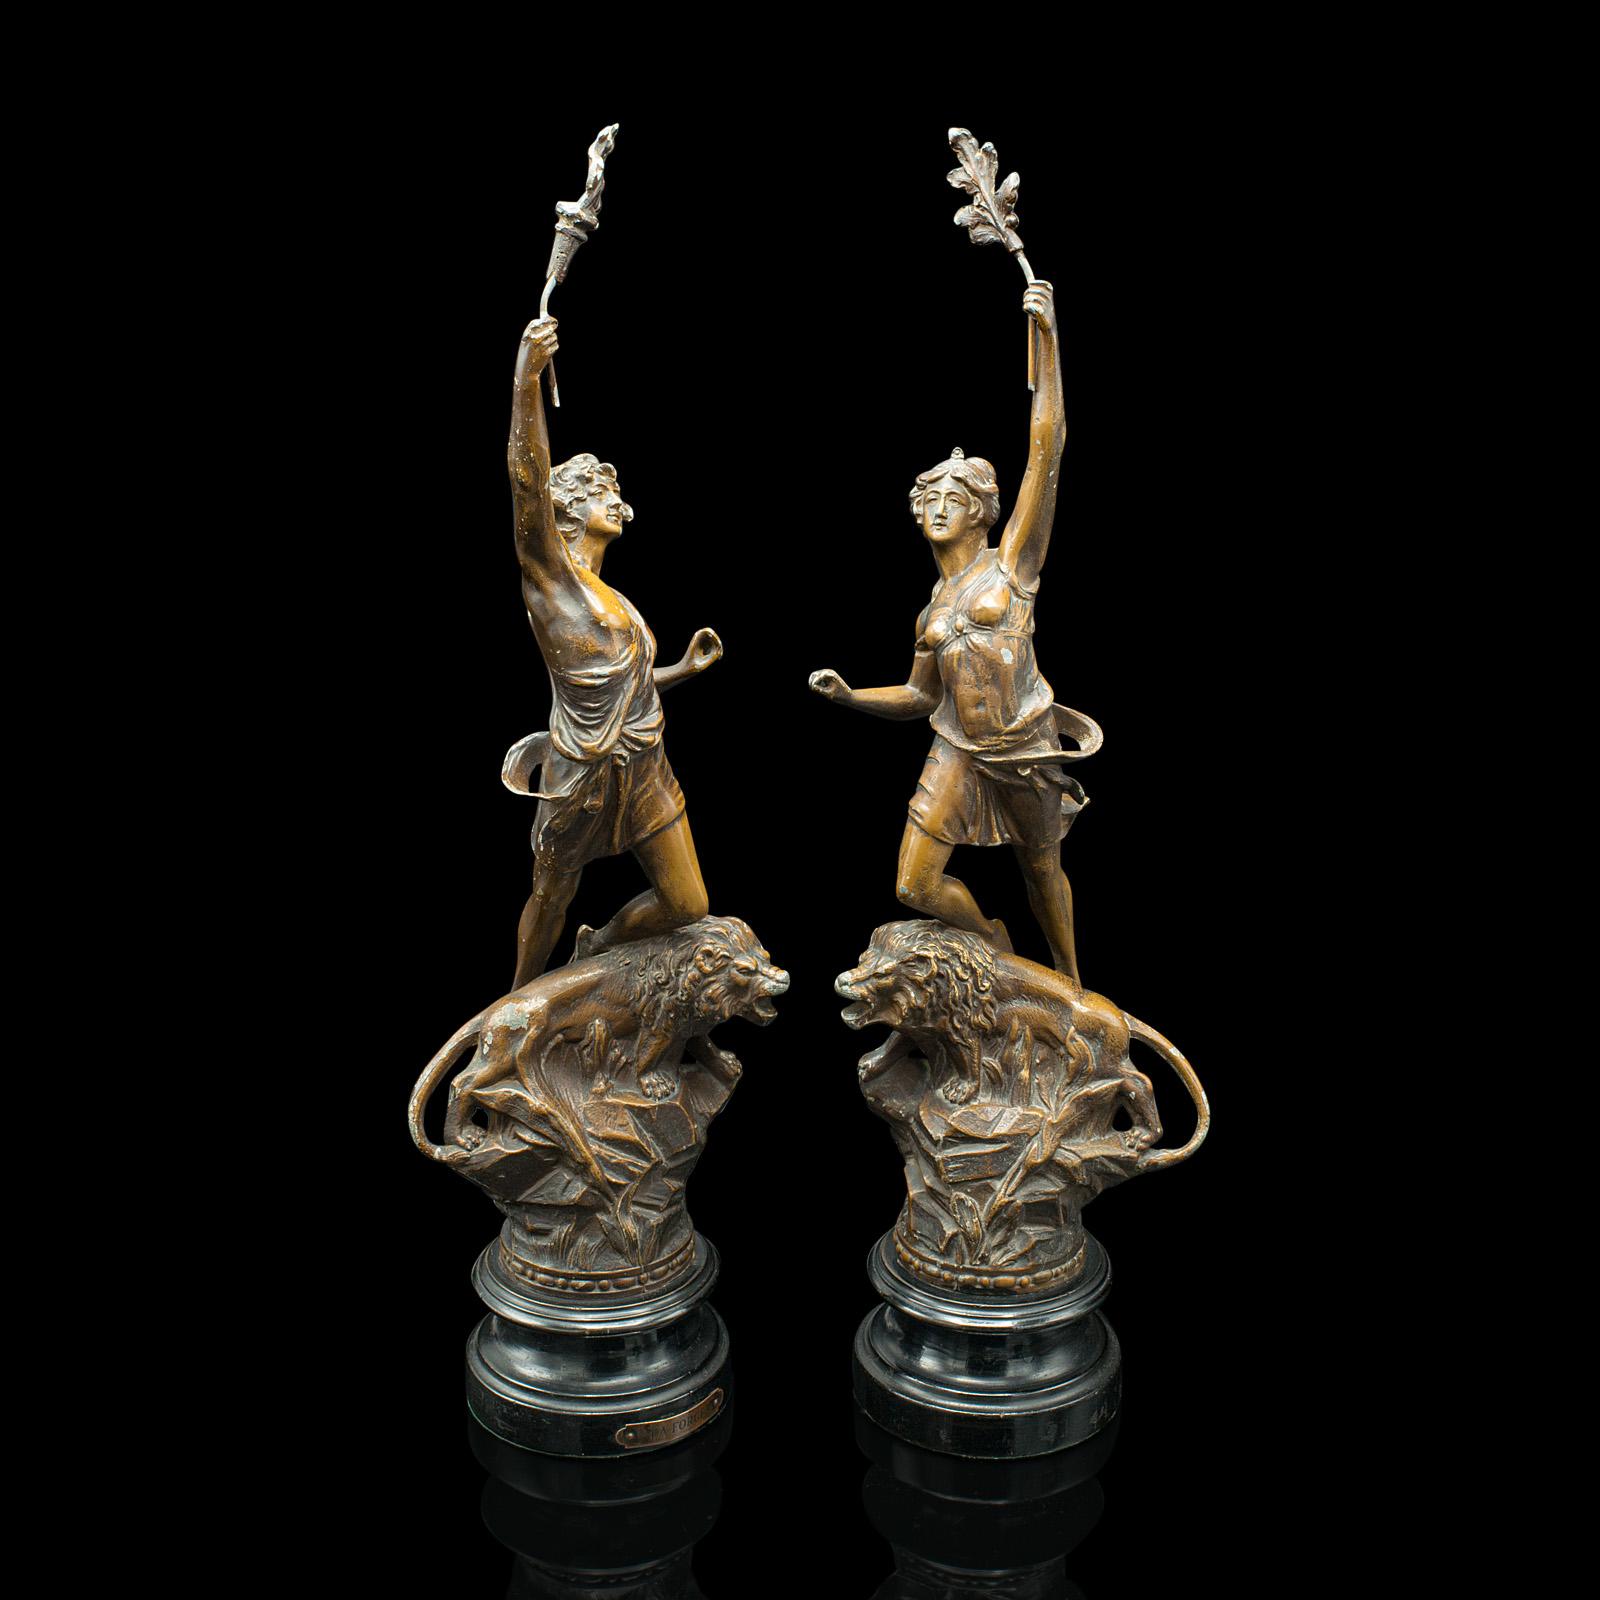 This is a pair of antique decorative figures. A French, spelter bronze classical influenced statue, dating to the early 20th century, circa 1920.

Charming characters with appealing tonality
Displaying a desirable aged patina and in good original